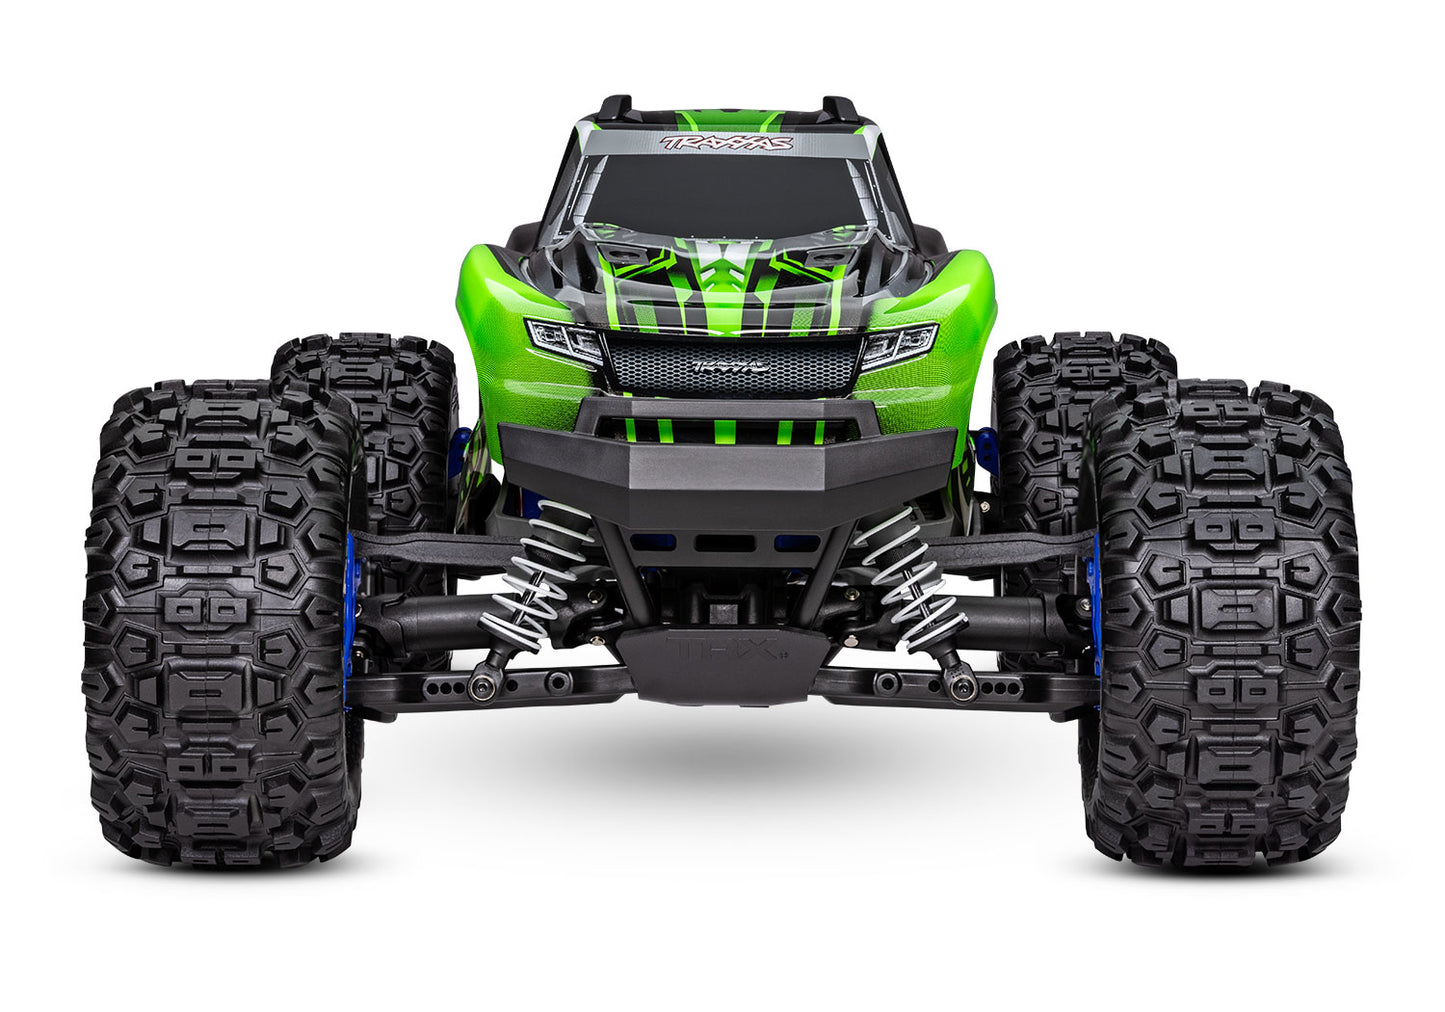 67154-4 Stampede 4X4 BL-2s: 1/10 Scale 4WD Monster Truck Green